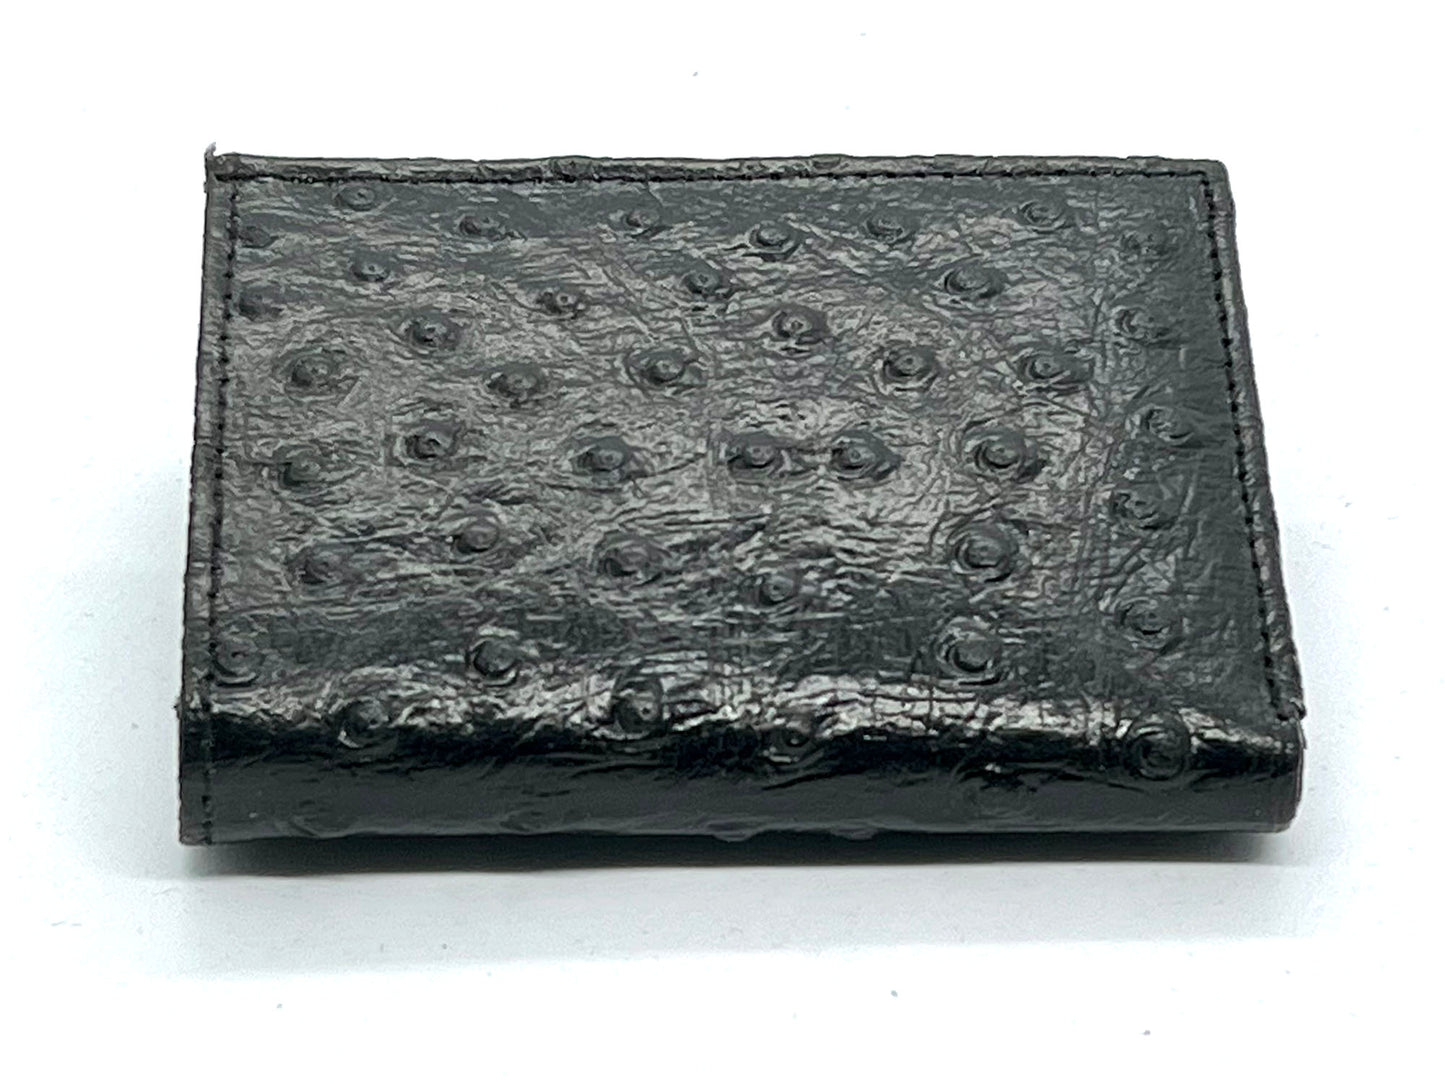 Genuine Leather Ostrich Print Men's Trifold Wallet Credit Card Holder ID Window